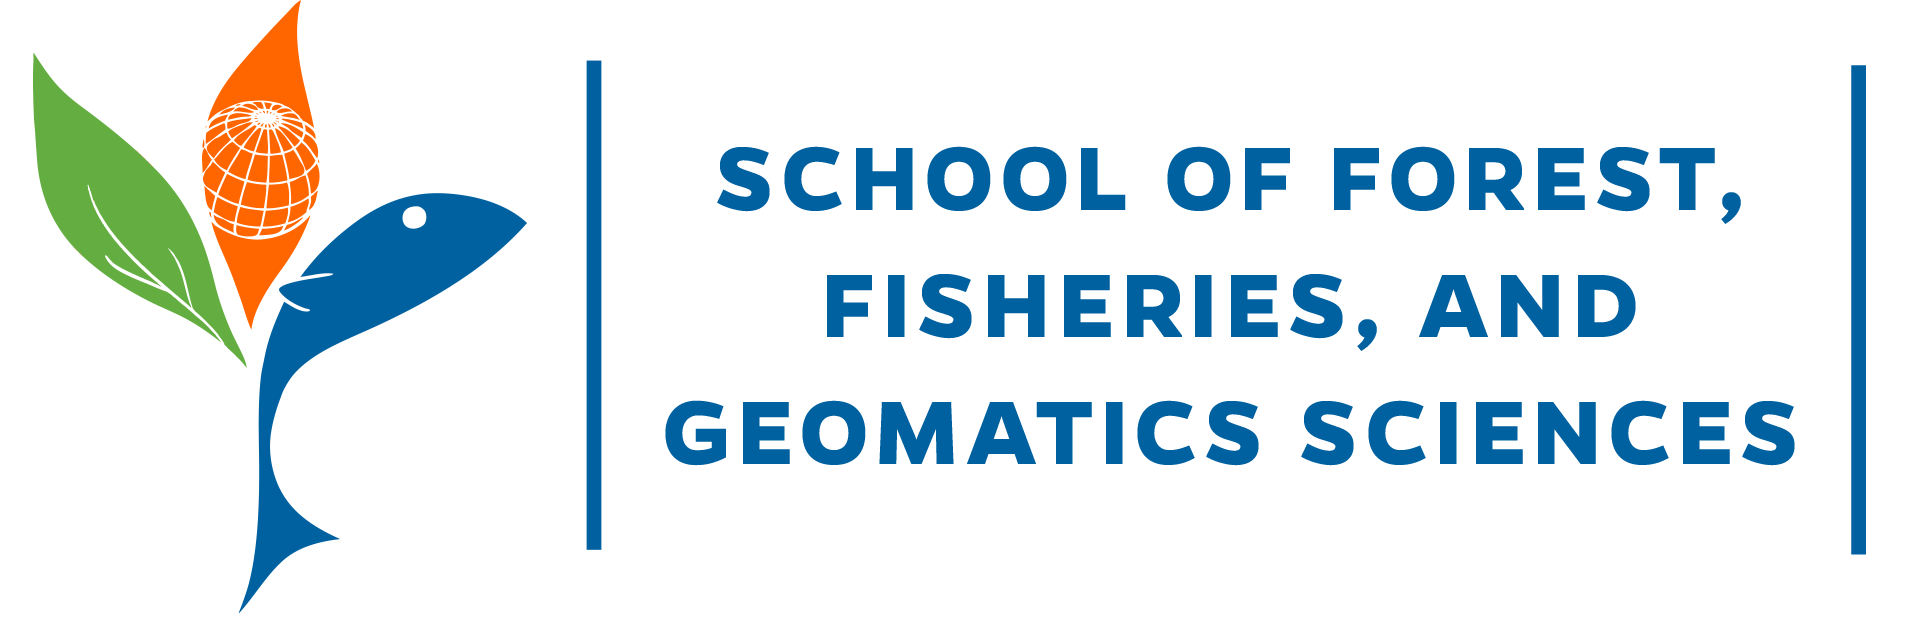 University of Florida School of Forest, Fisheries, and Geomatics Science logo